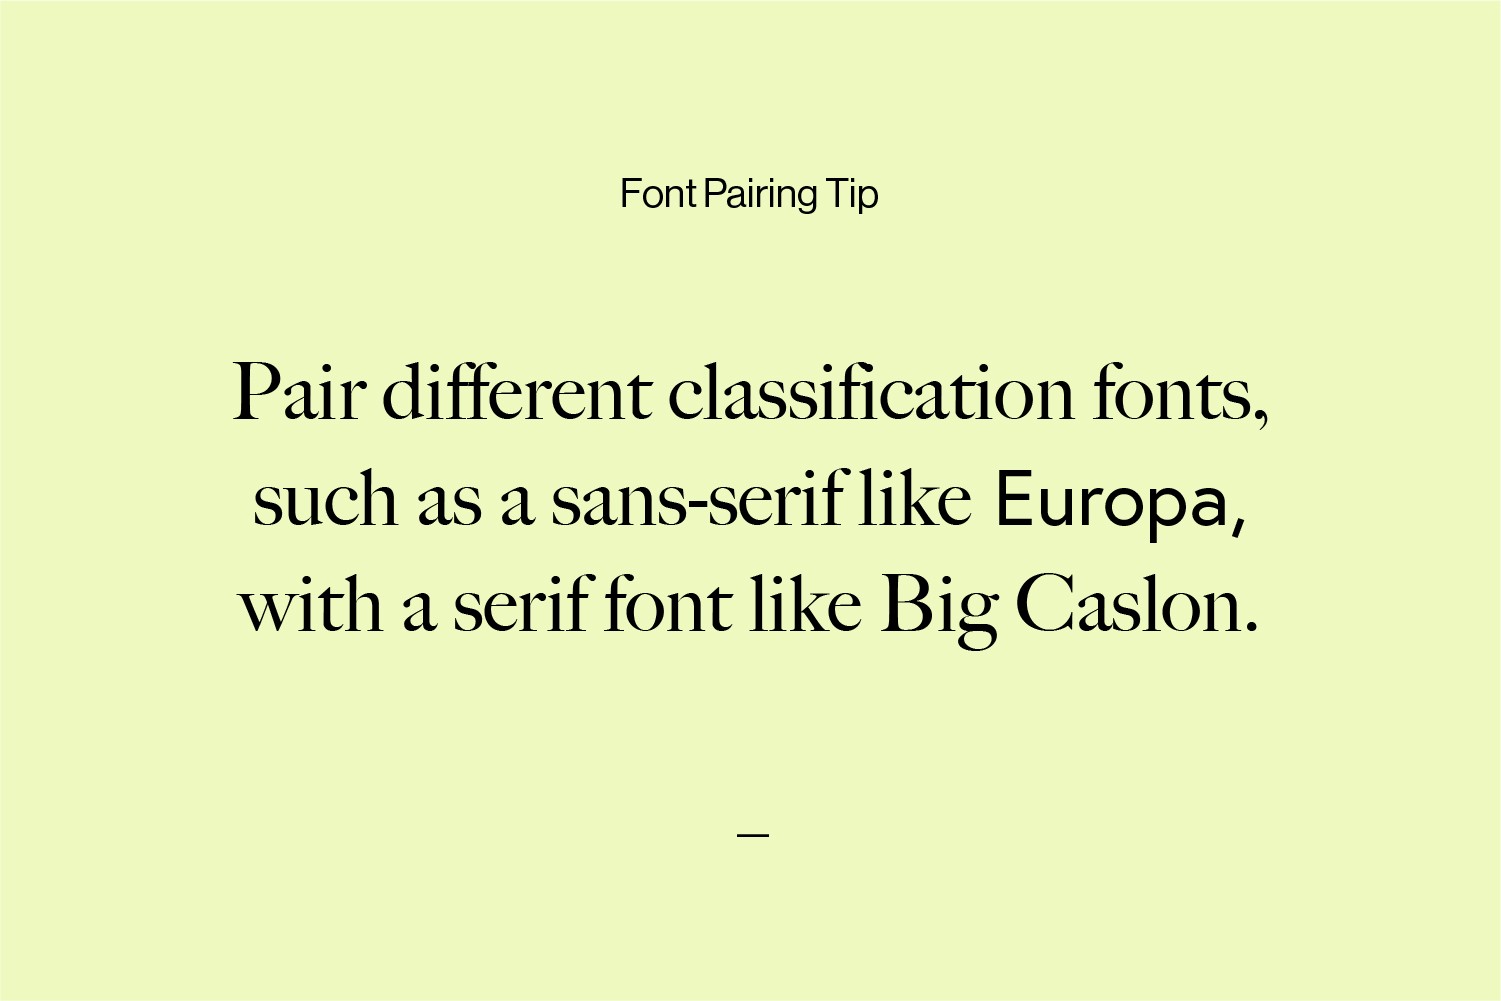 Font pairing advice that reads: Pair different classification fonts, such as a sans-serif like Europa, with a serif font like Big Caslon.